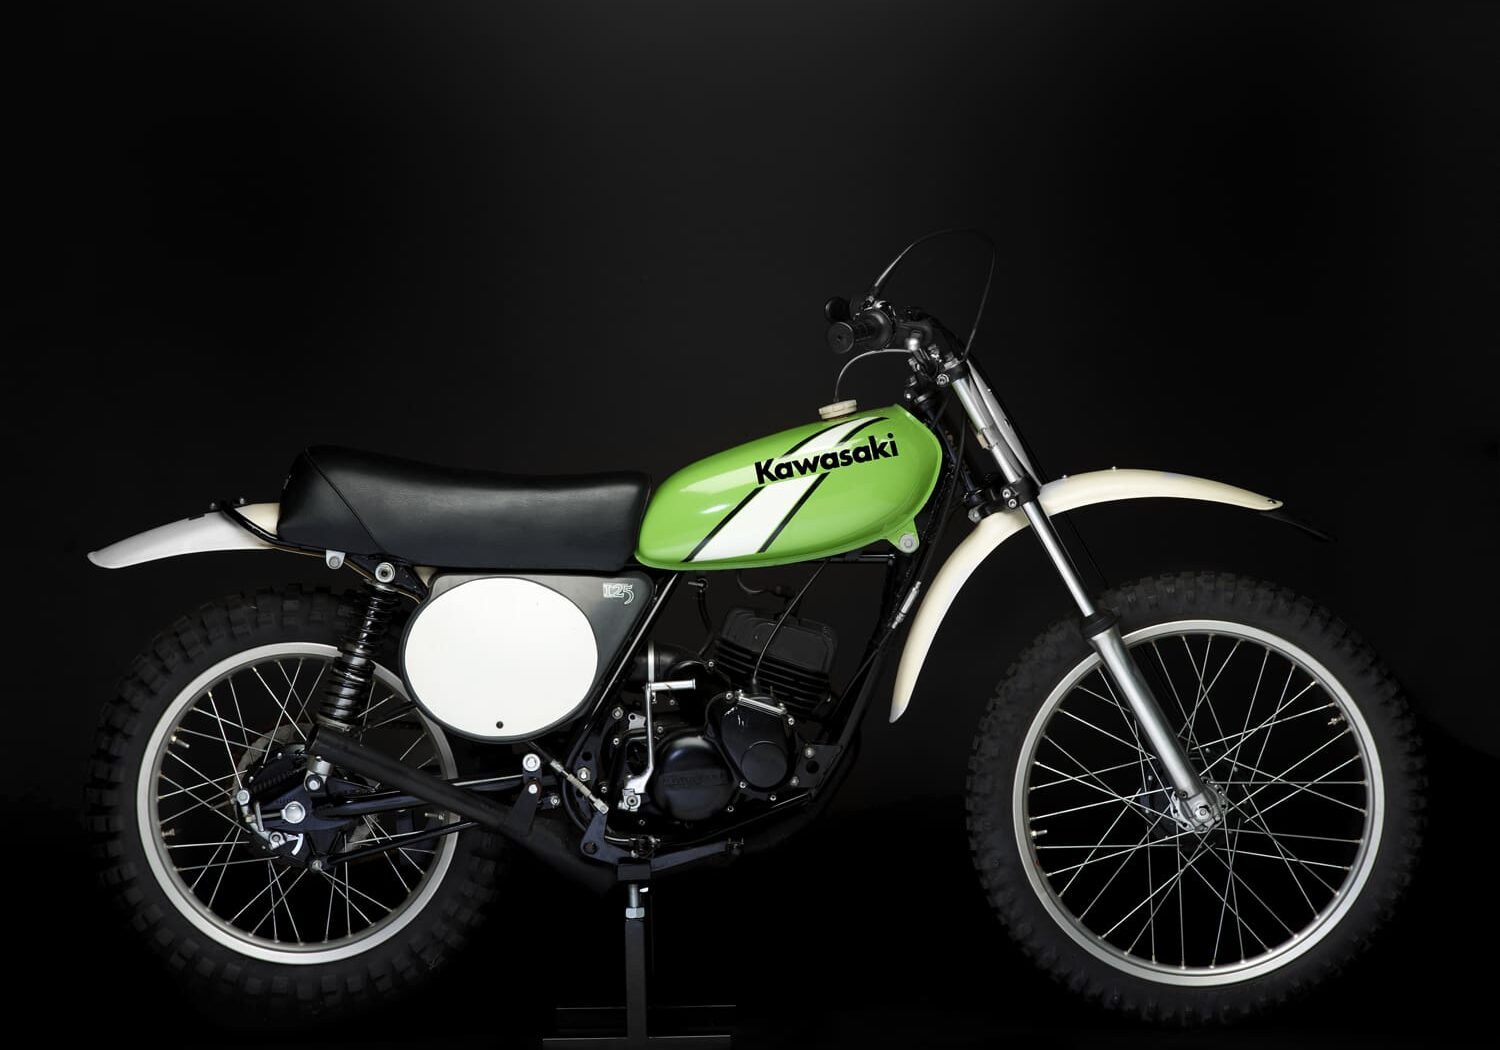 A green dirt bike is on display against a black background.